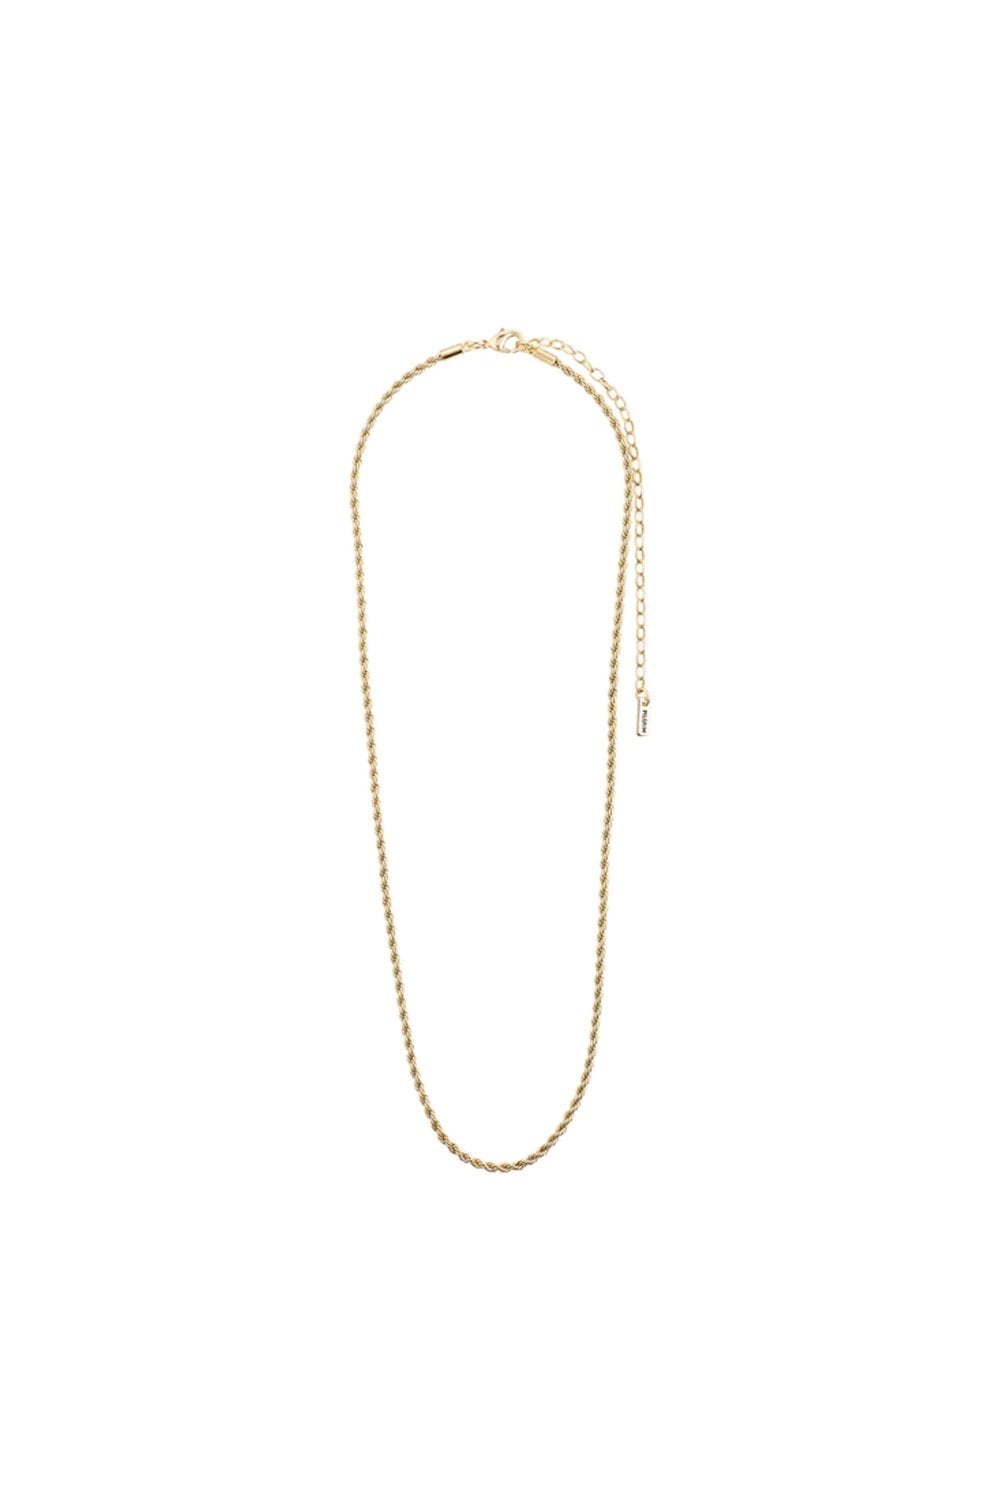 Pilgrim Pam Robe Chain Necklace In Gold